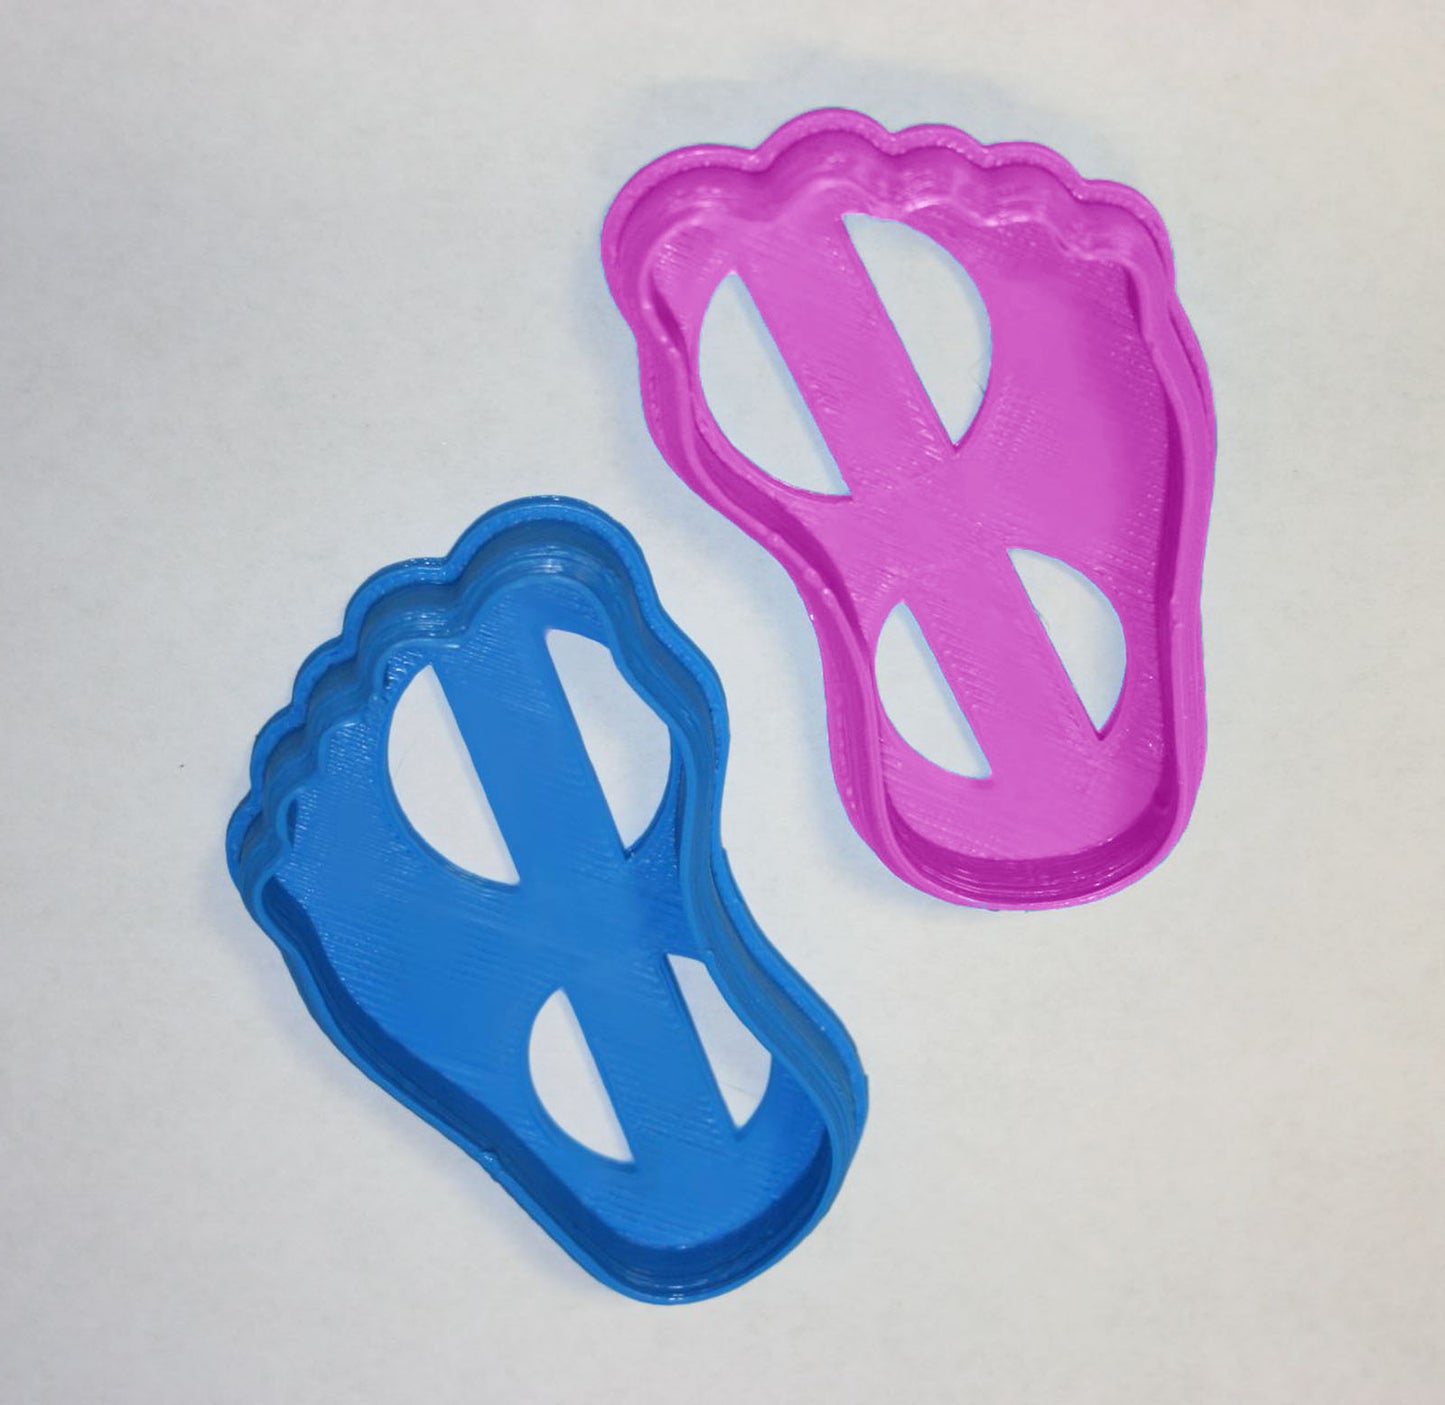 6x Baby Foot Outline Fondant Cutter Cupcake Topper Size 1.75 IN USA FD76